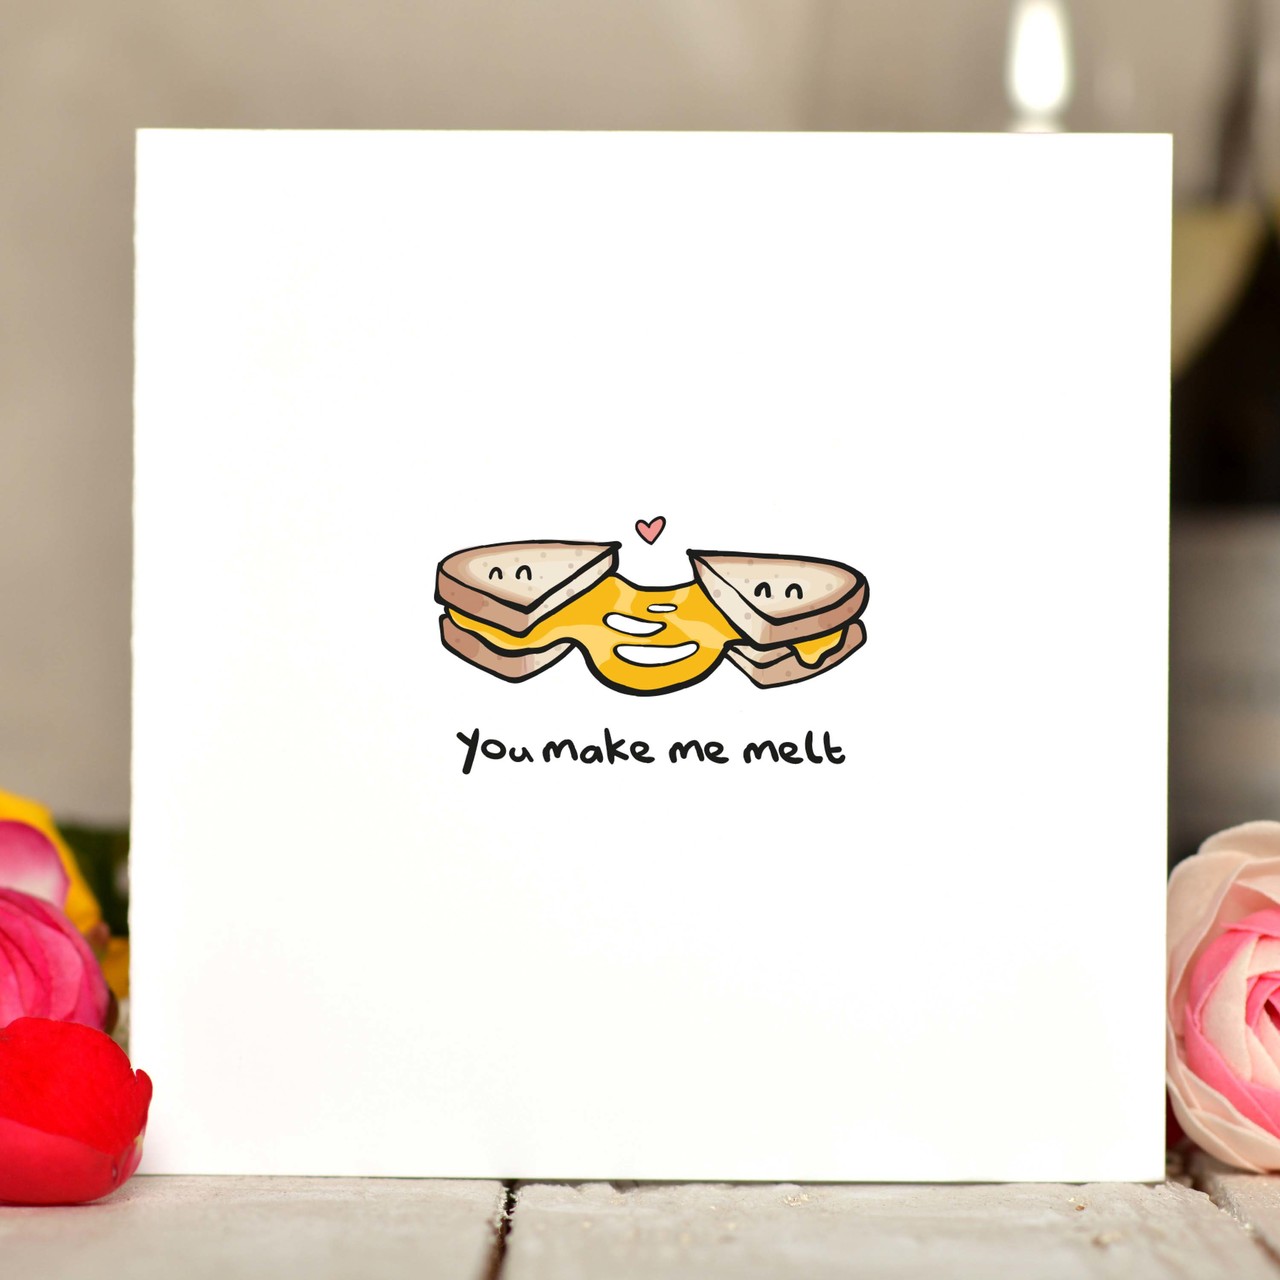 You make me melt – cheese on toast Card